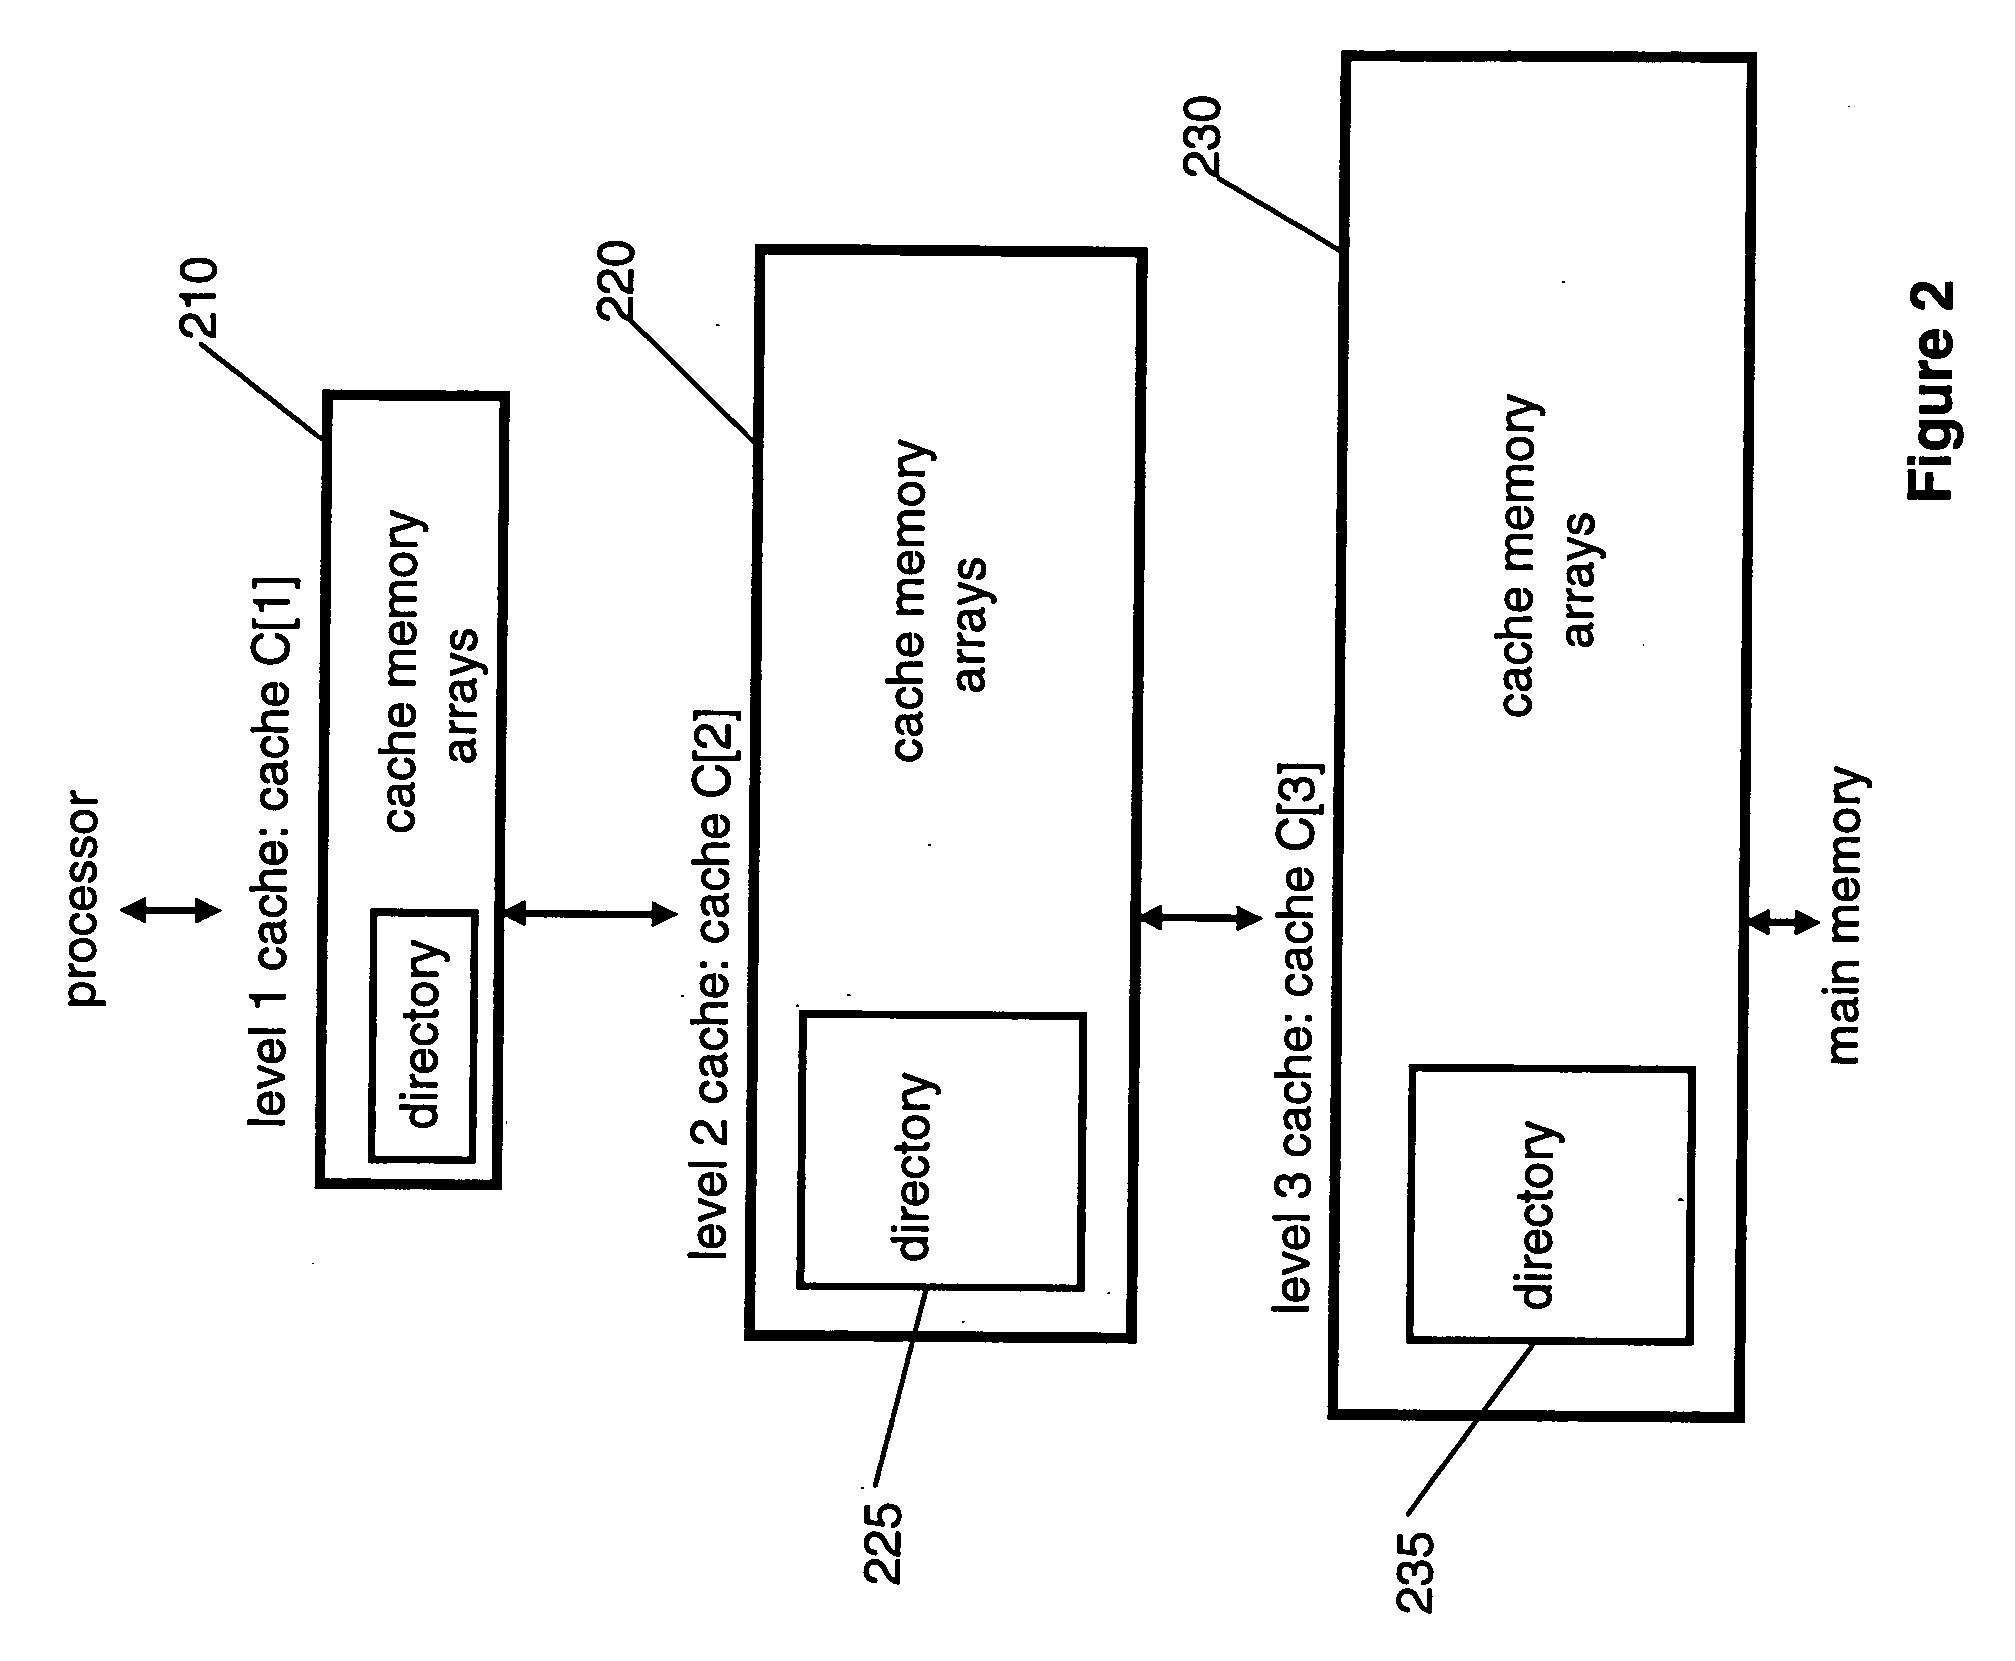 Enabling and disabling cache bypass using predicted cache line usage